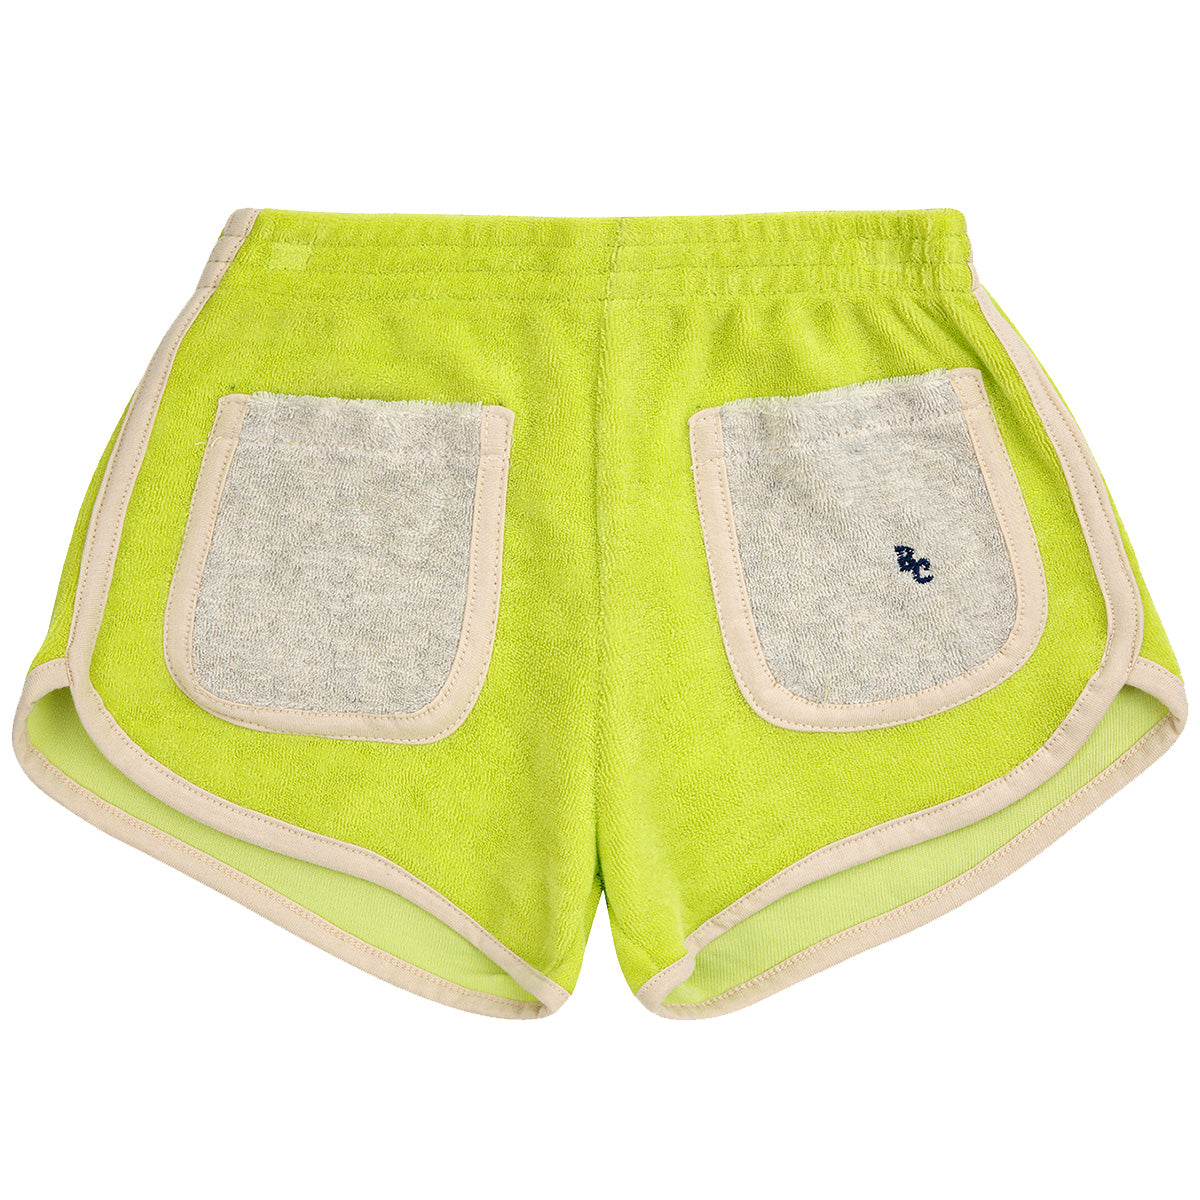 The Green Terry Shorts from Bobo Choses. Designed with regular crotch, elasticated waistband, slim fit